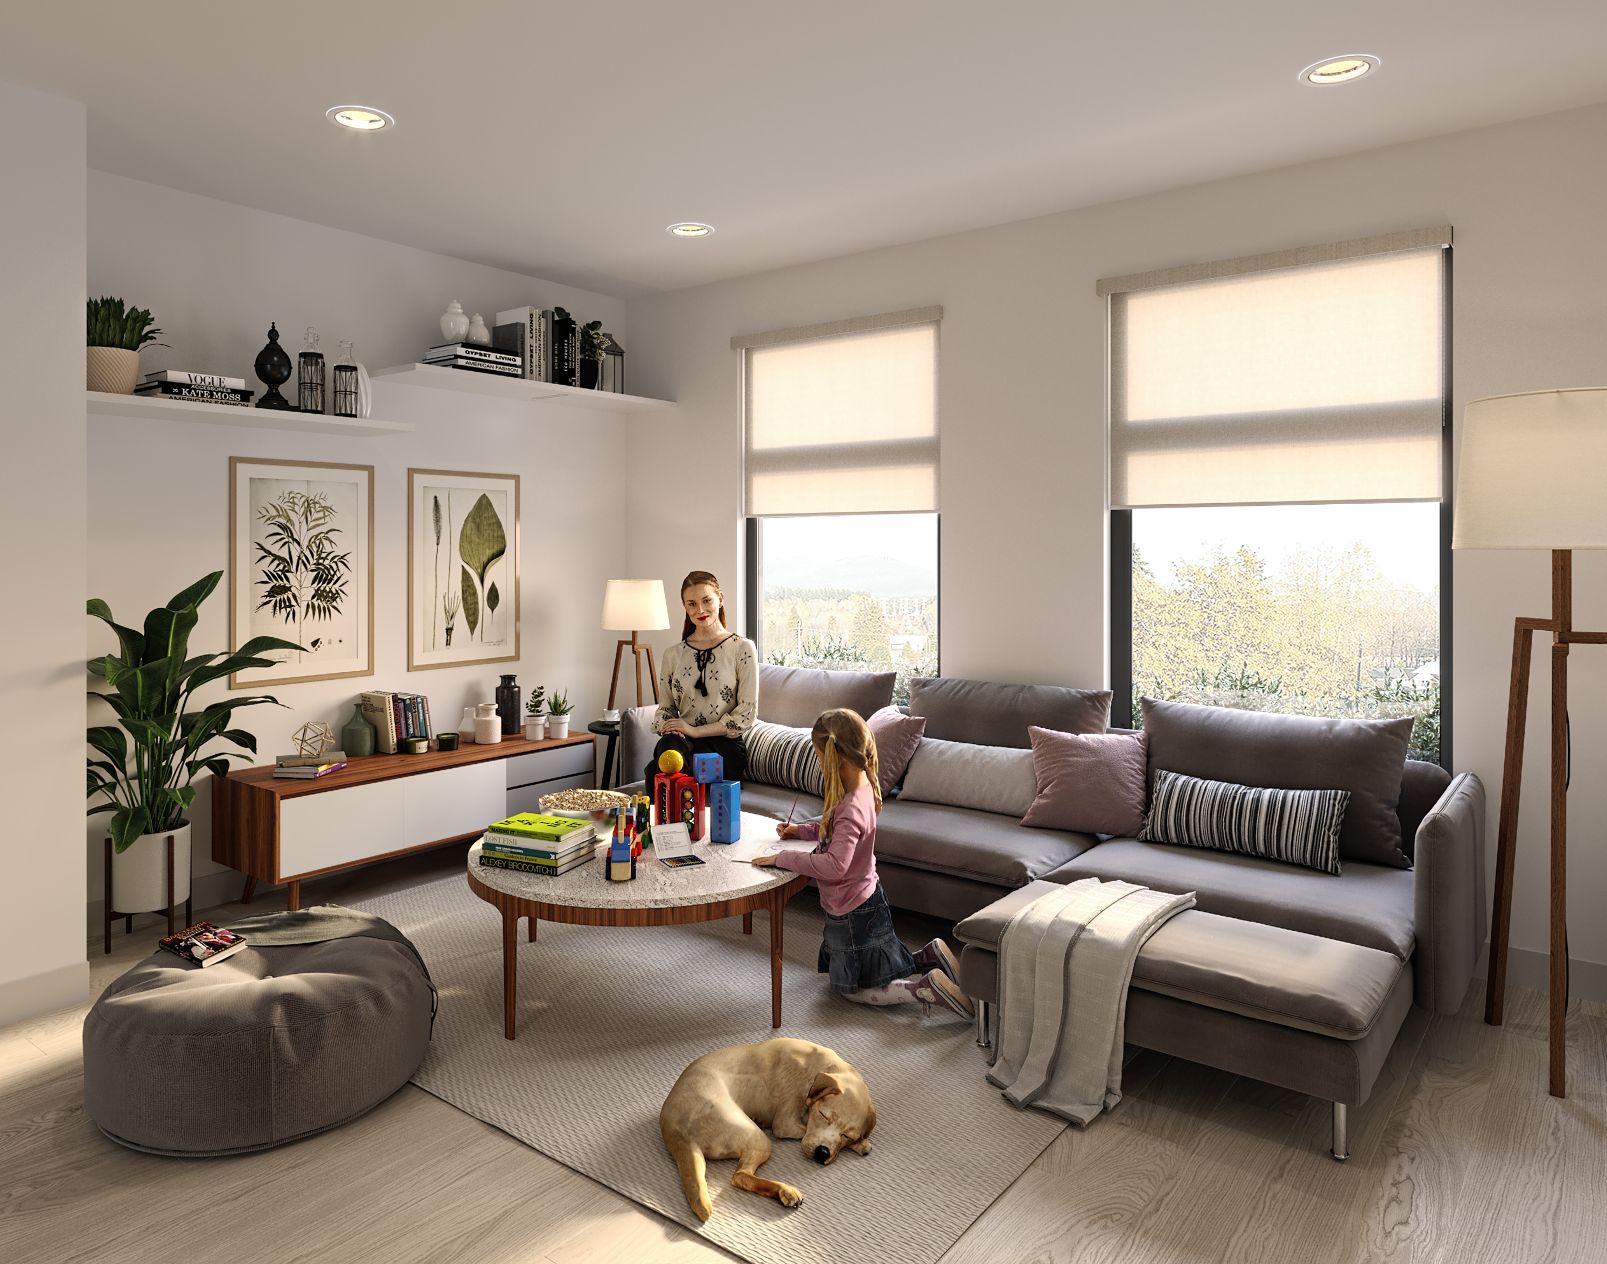 With three and four-bedroom layouts to choose from, there’s room for the whole family at 1515 Rupert.